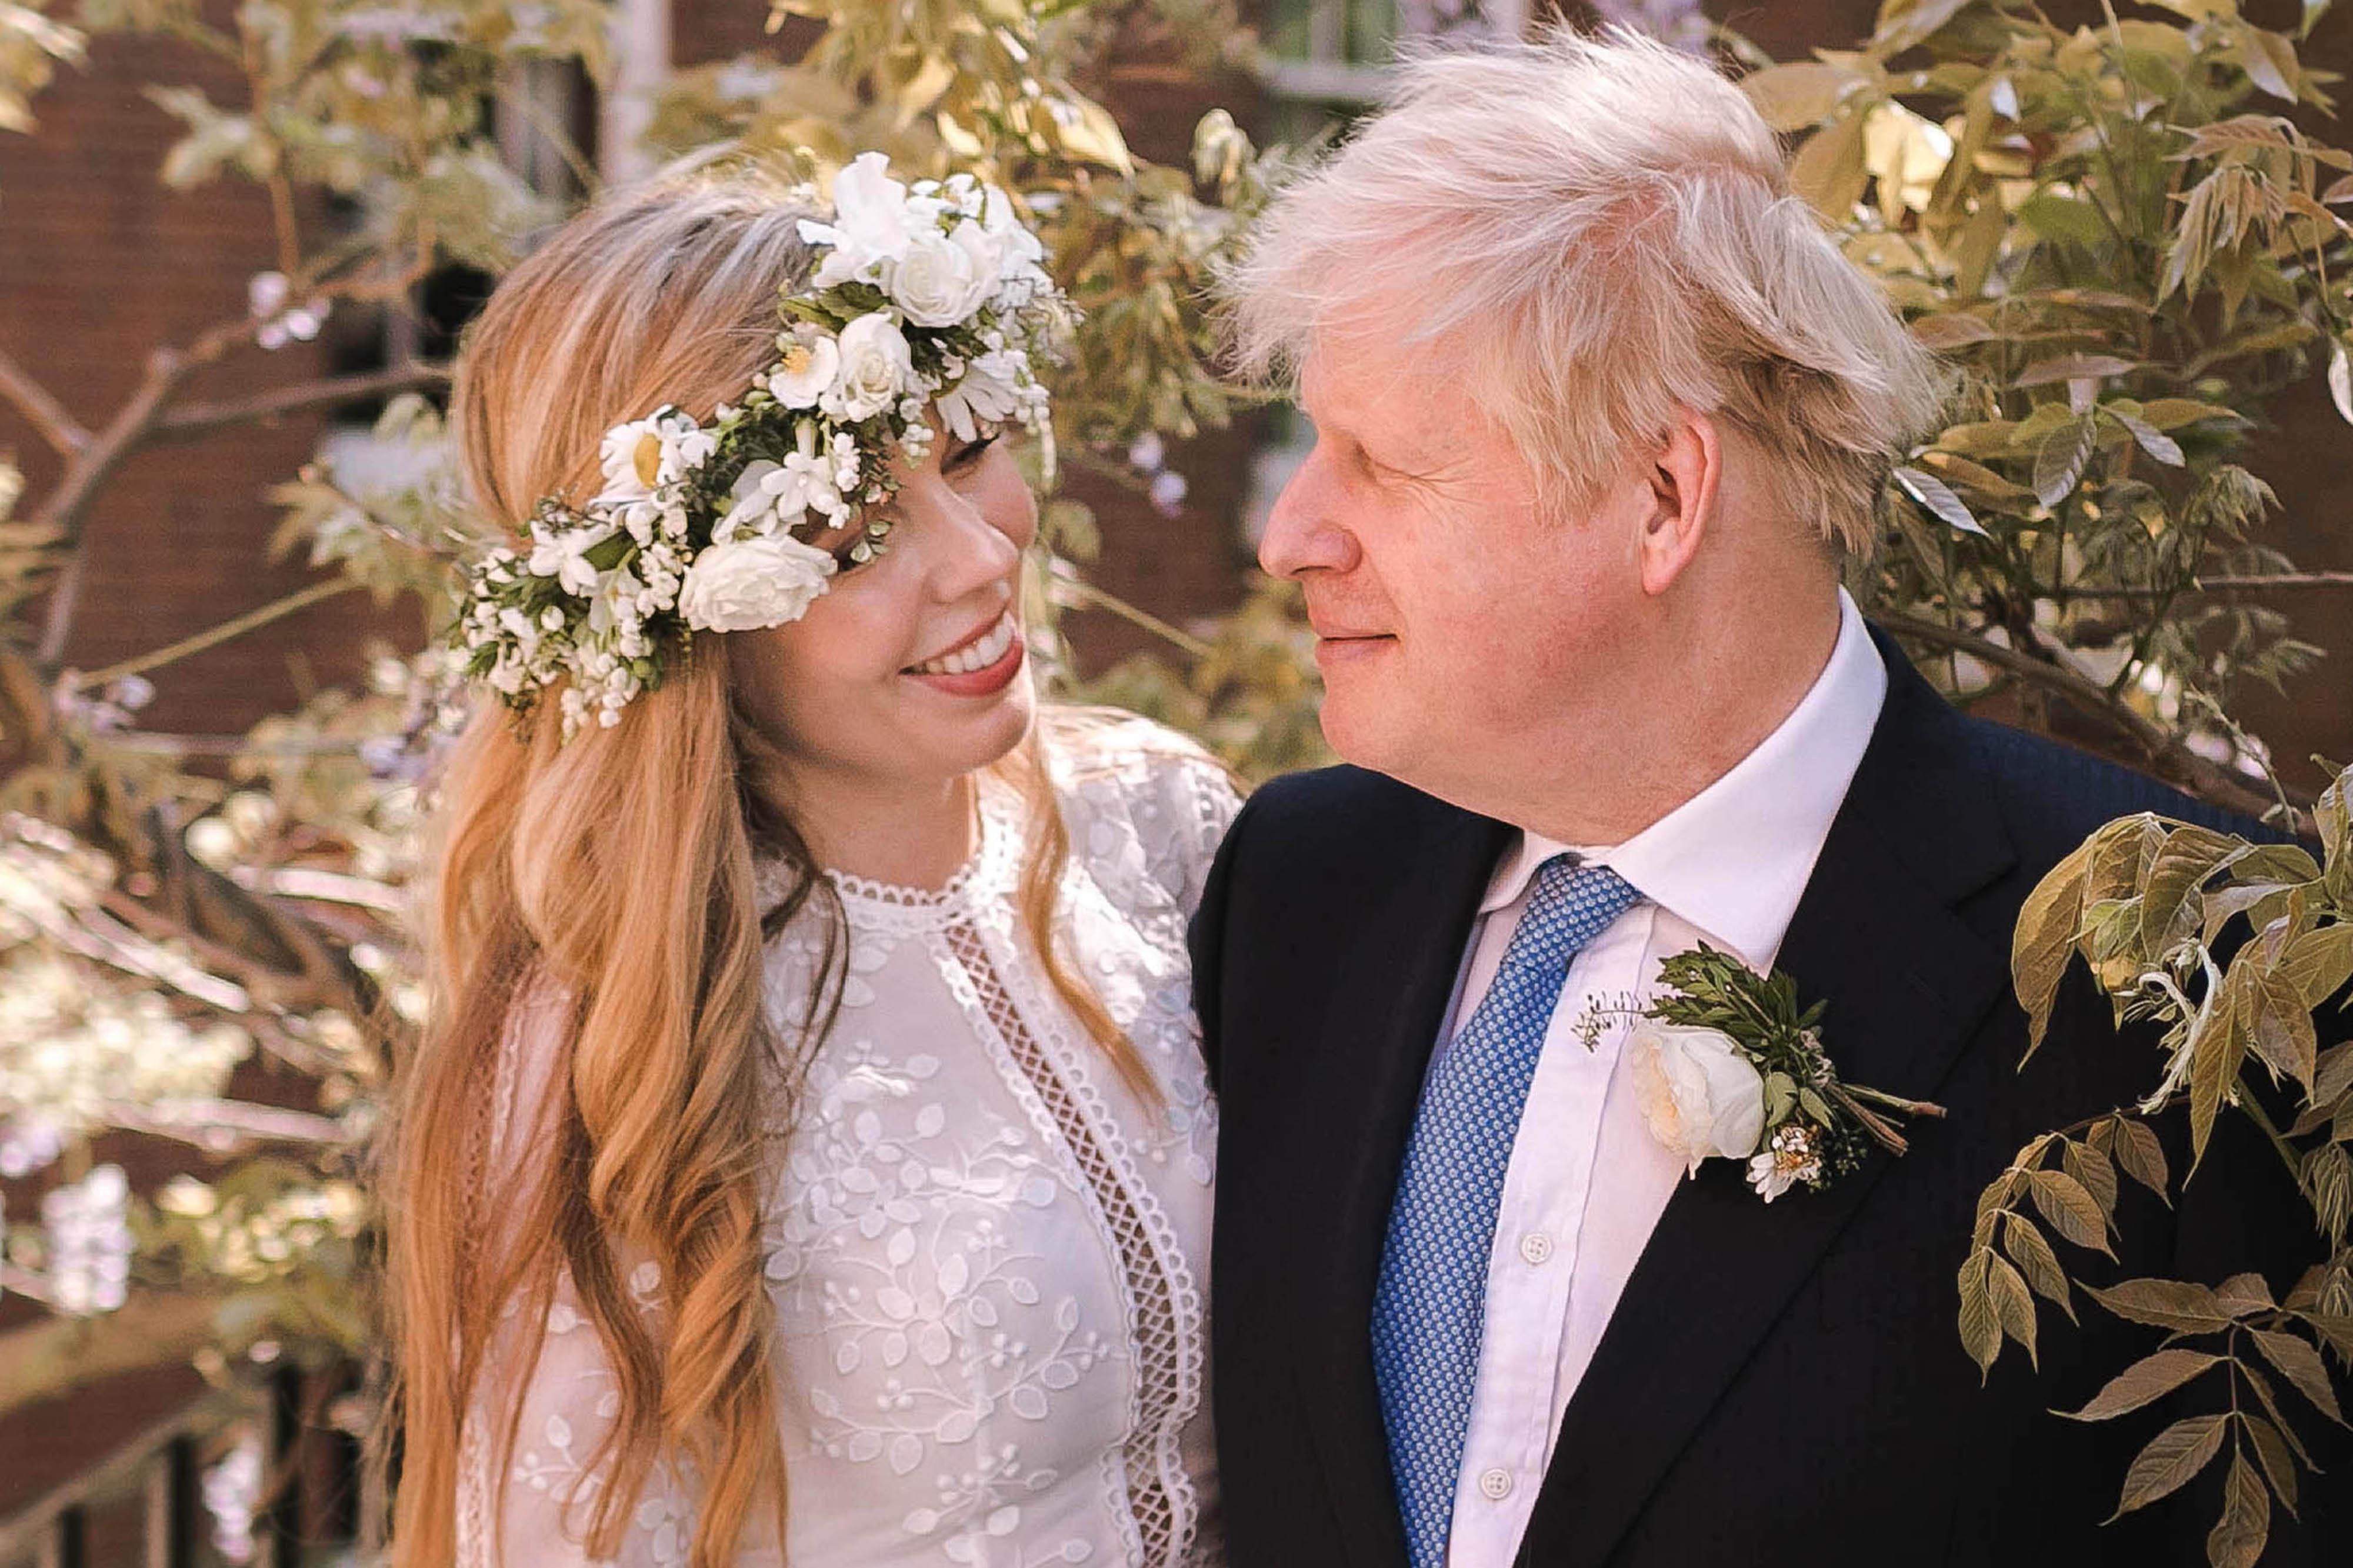 Boris Johnson And Wife Carrie To Host Wedding Party At Chequers While Pm Clings On The Independent